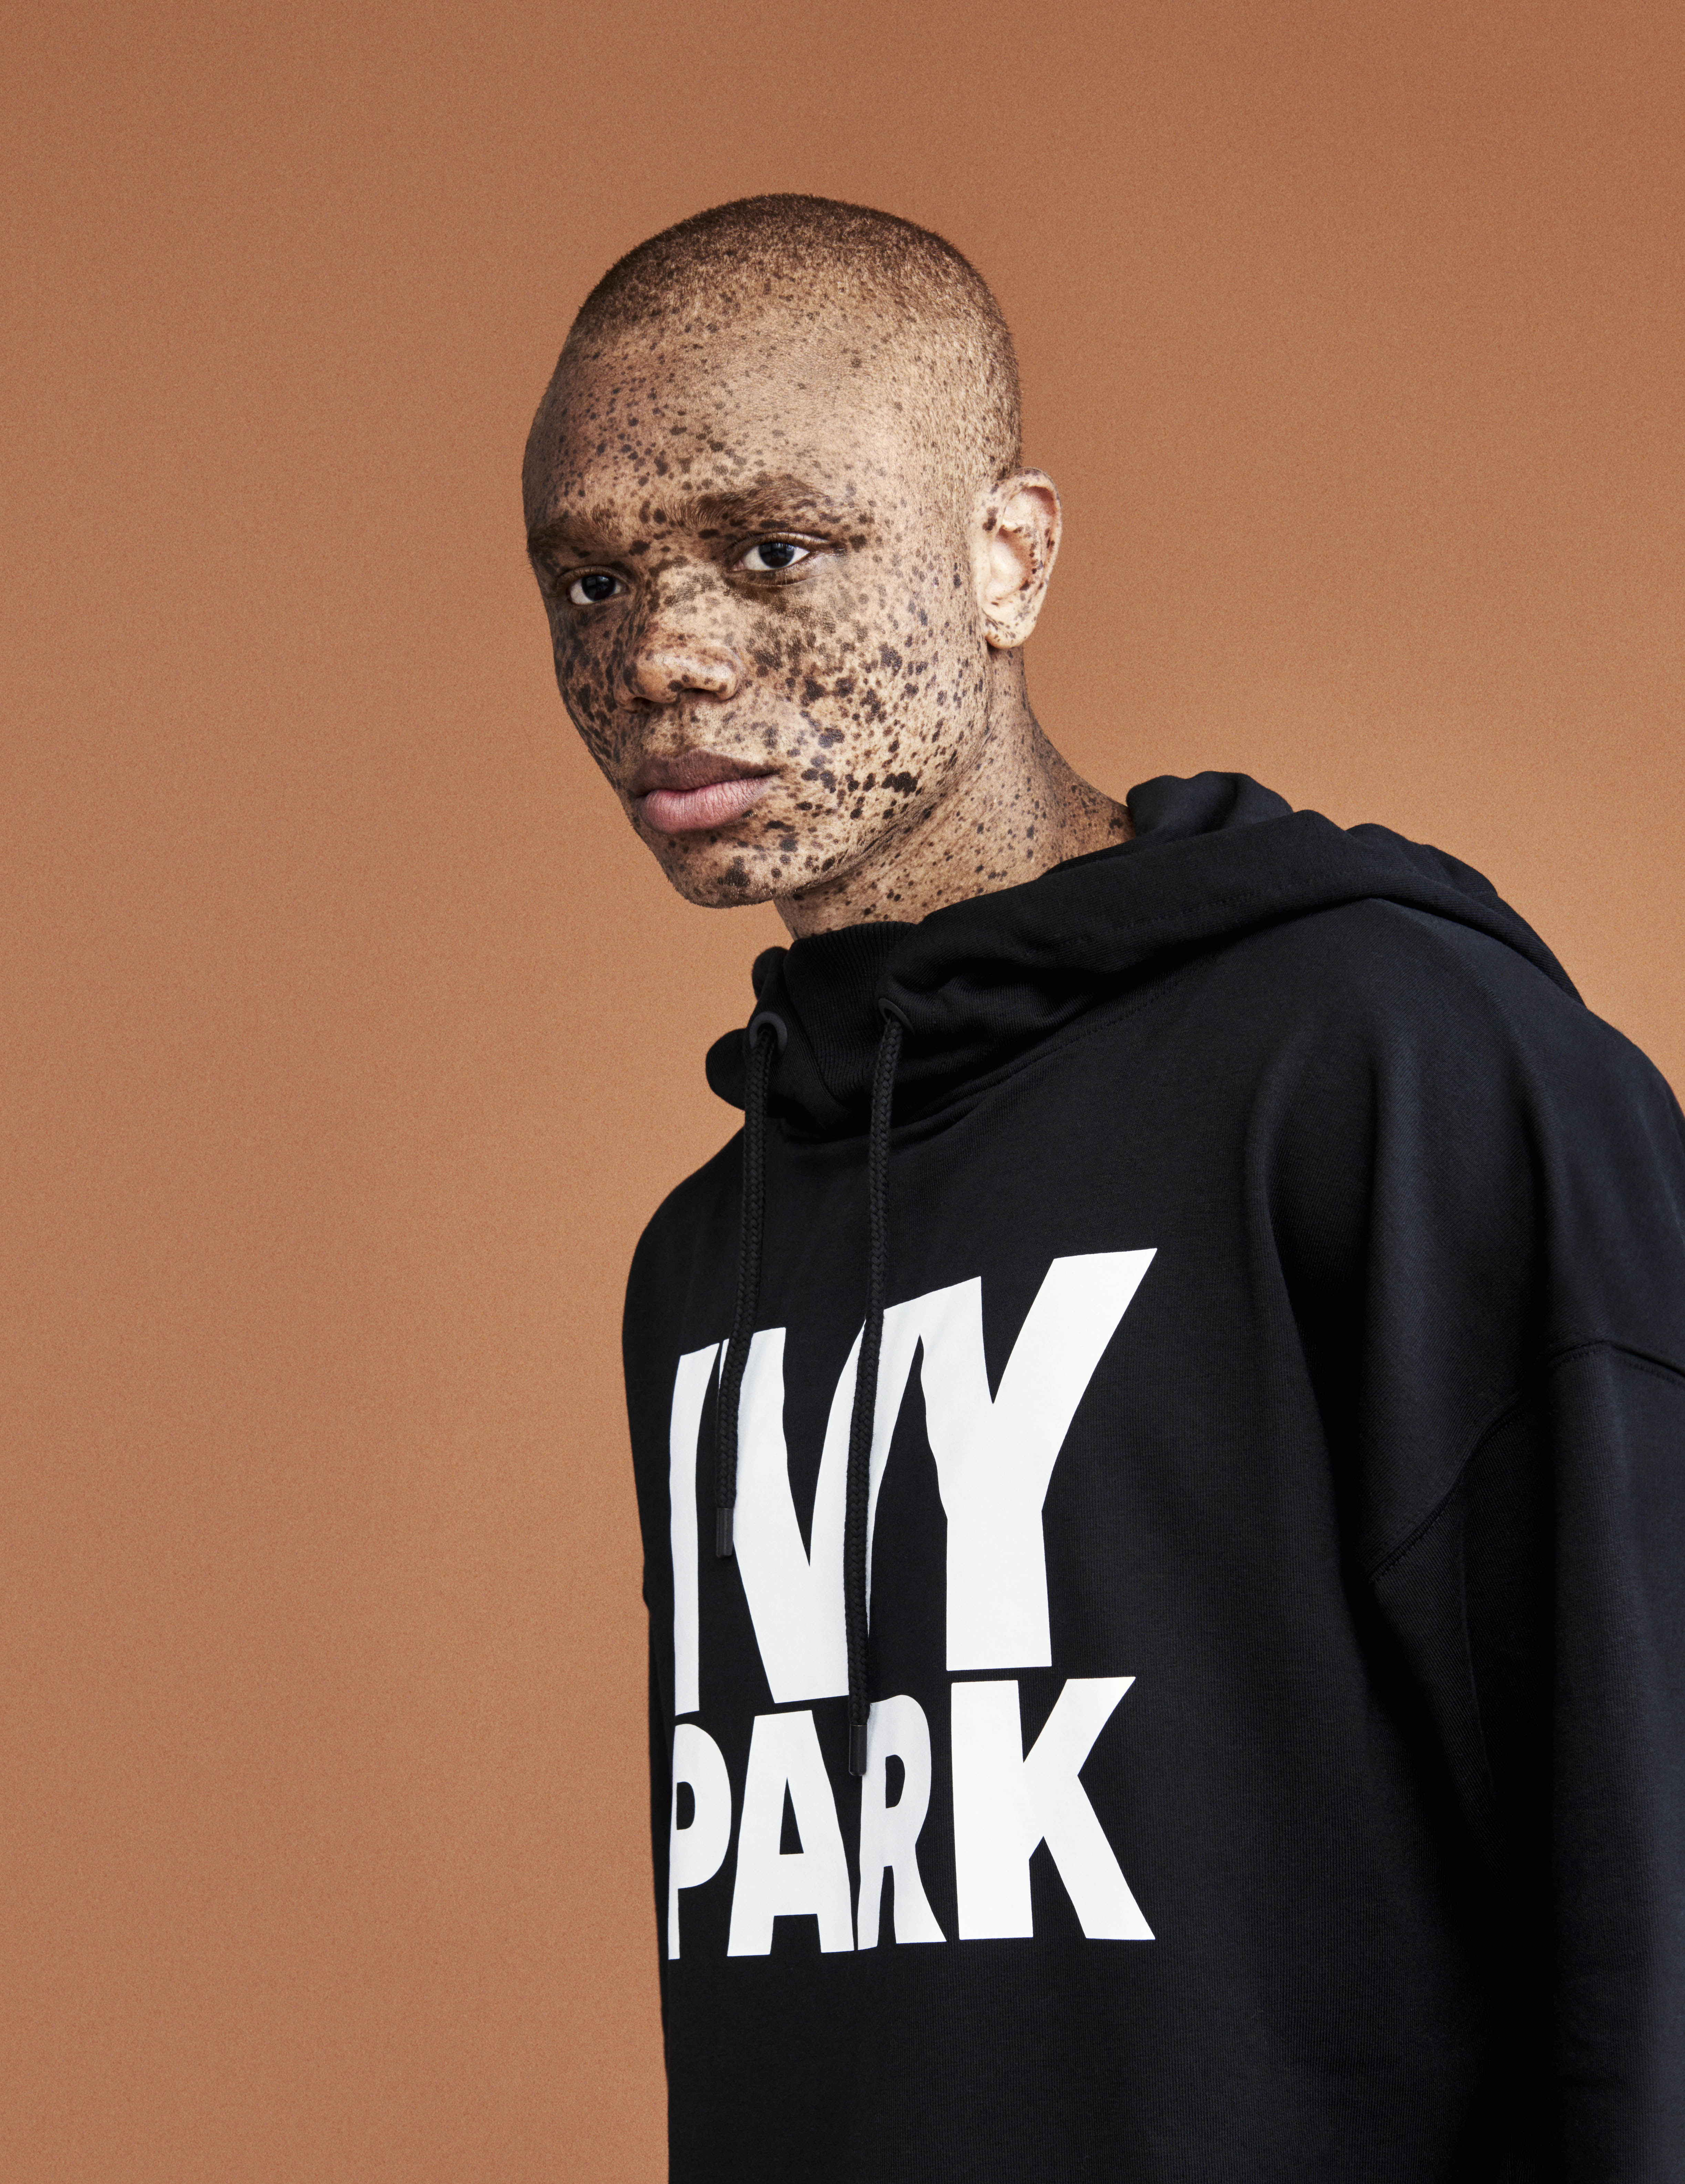 ivy park just dropped its new campaign 